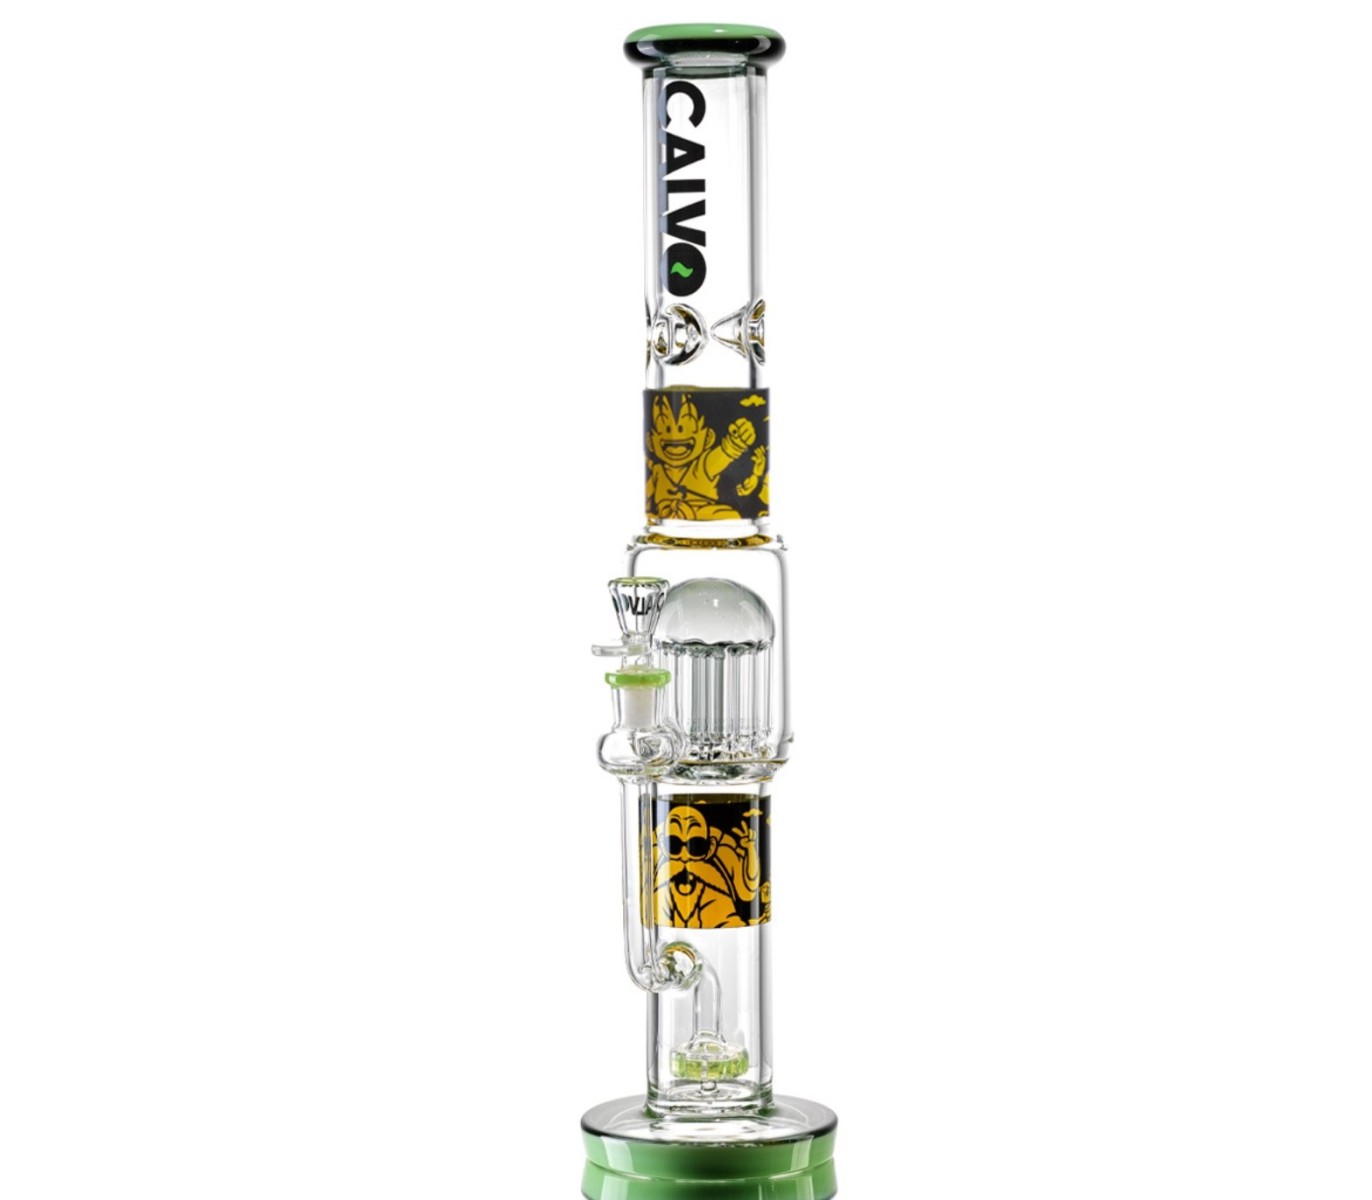 Wholesale 9 Inch Animal Shaped Glass Bong With Honeycomb Surface For  Smoking And Water Pipe From Dankstop, $22.34 | DHgate.Com